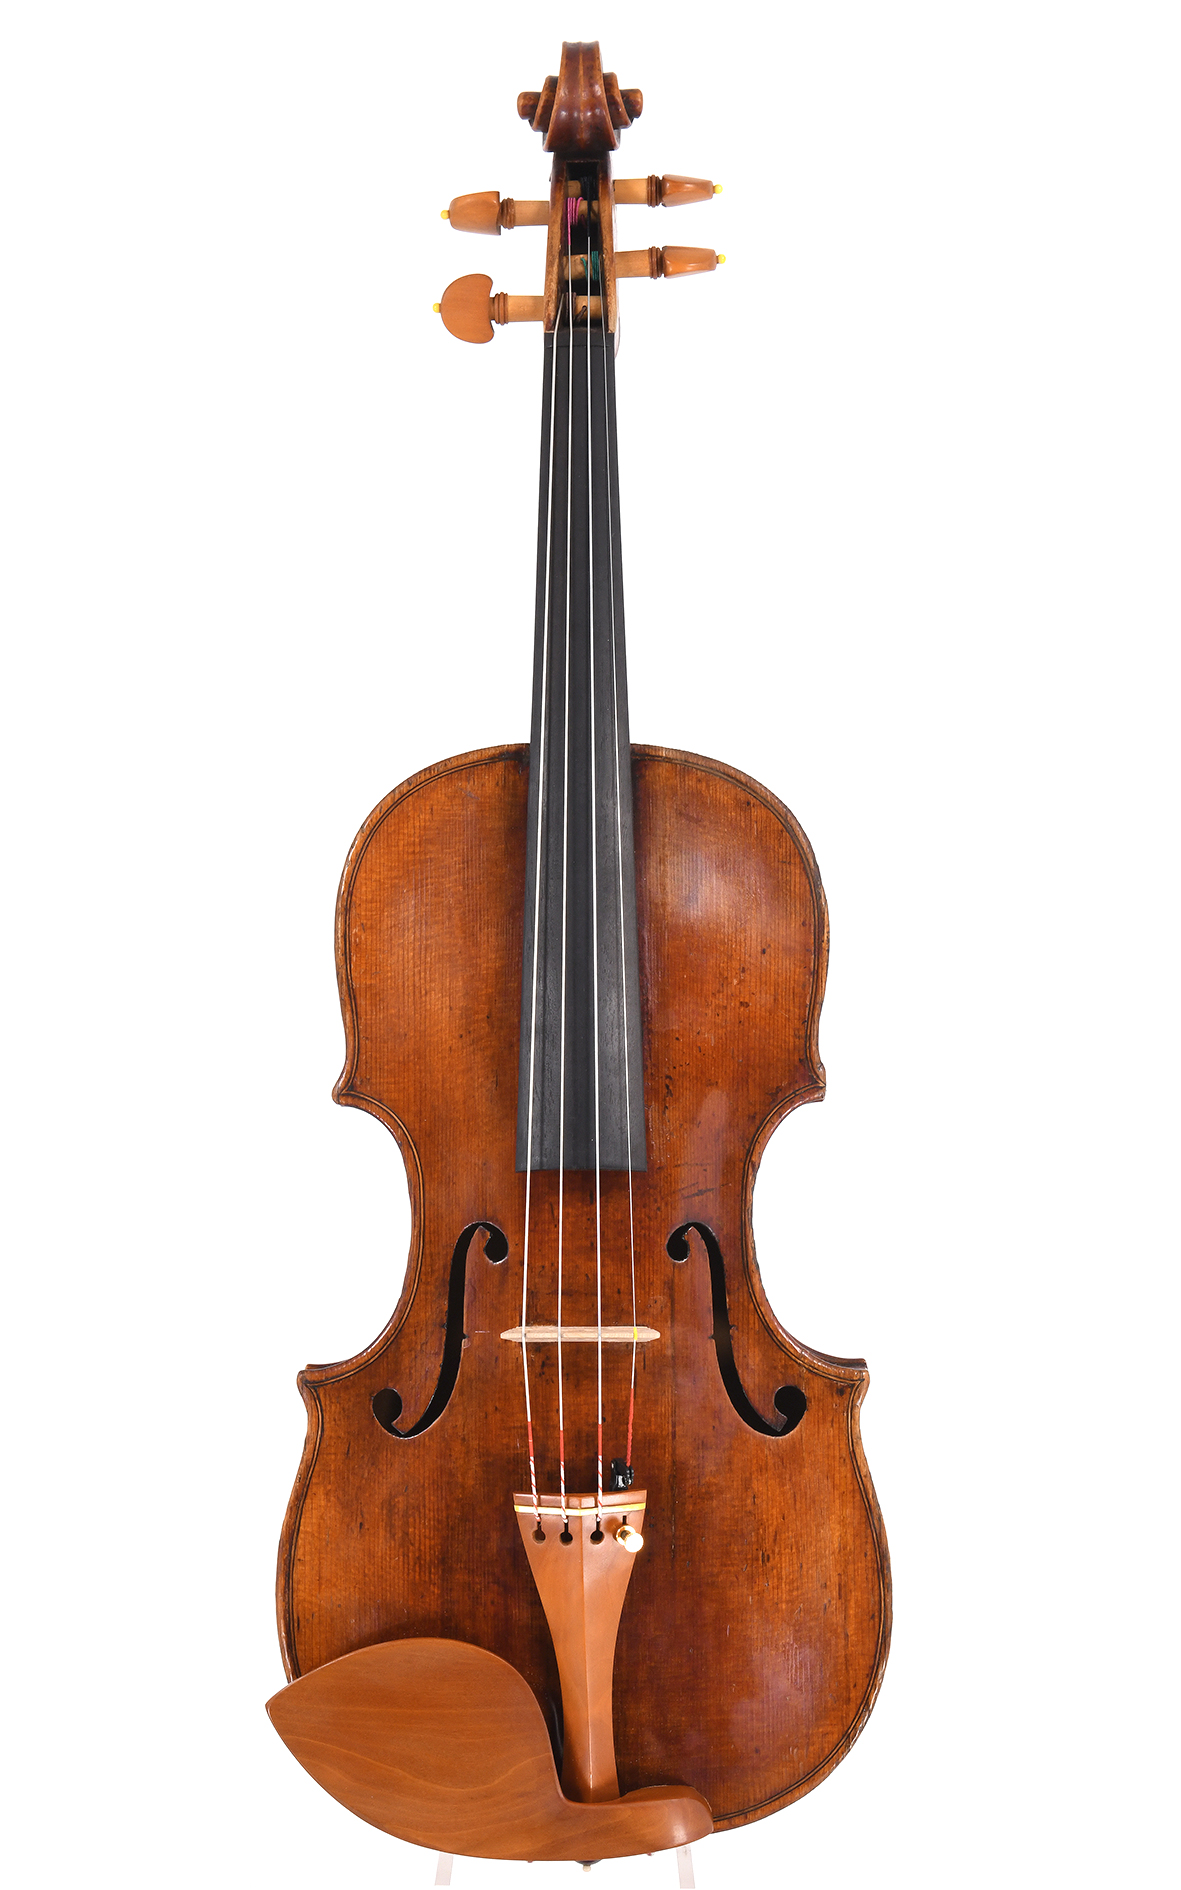 Master violin by the Hopf family, approx. 1800